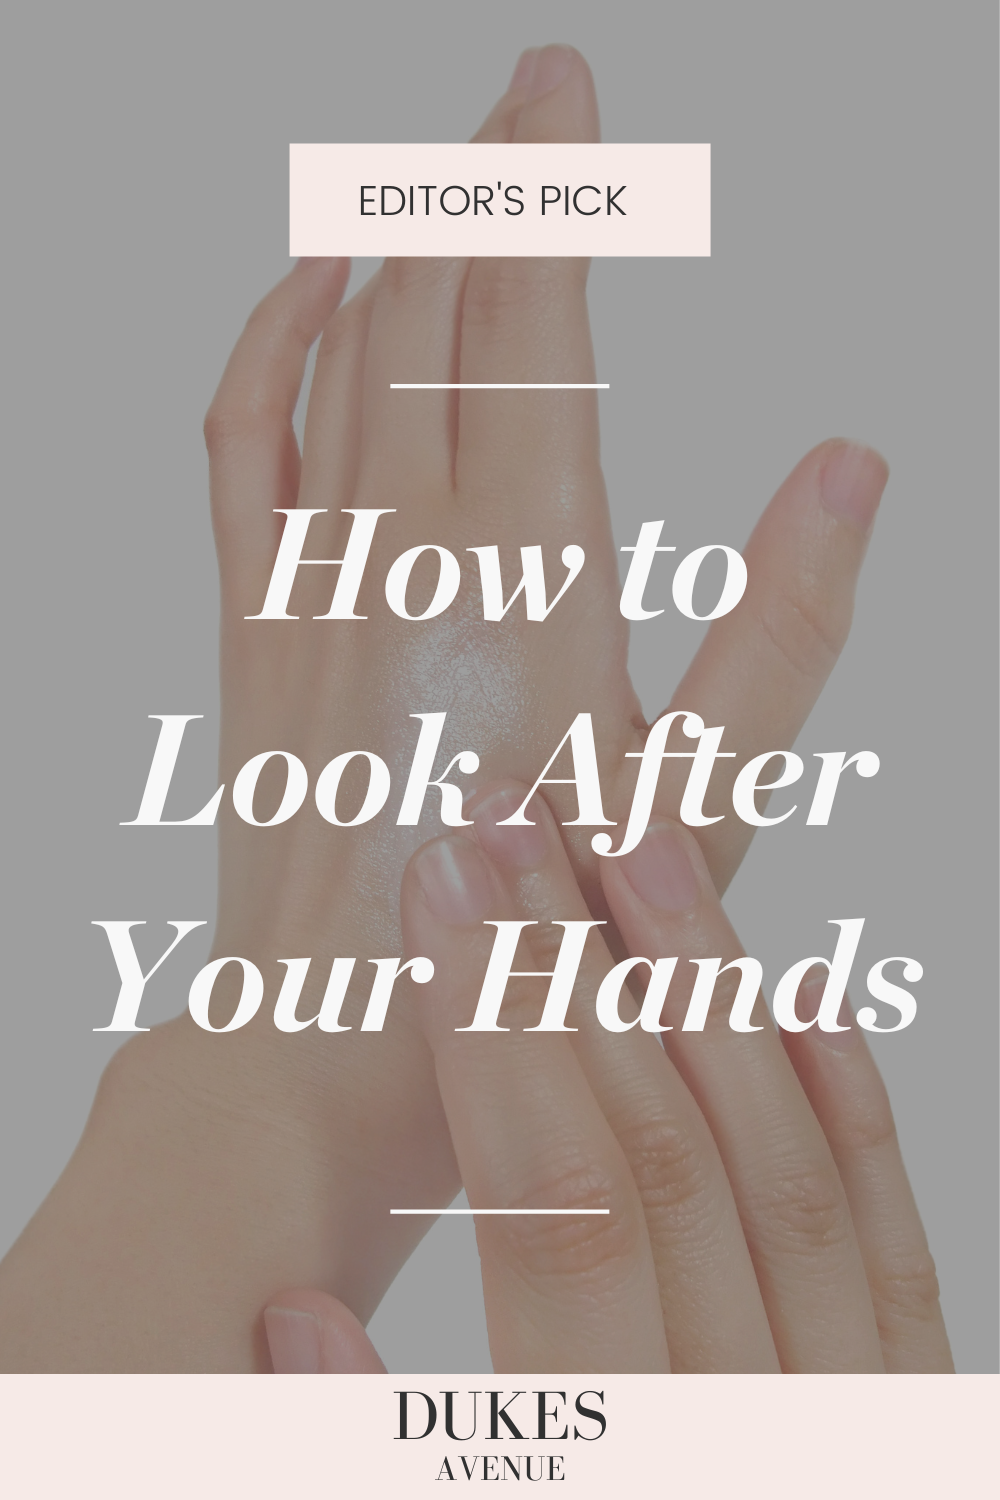 Picture of hands with text overlay 'How to Look After Your Hands'